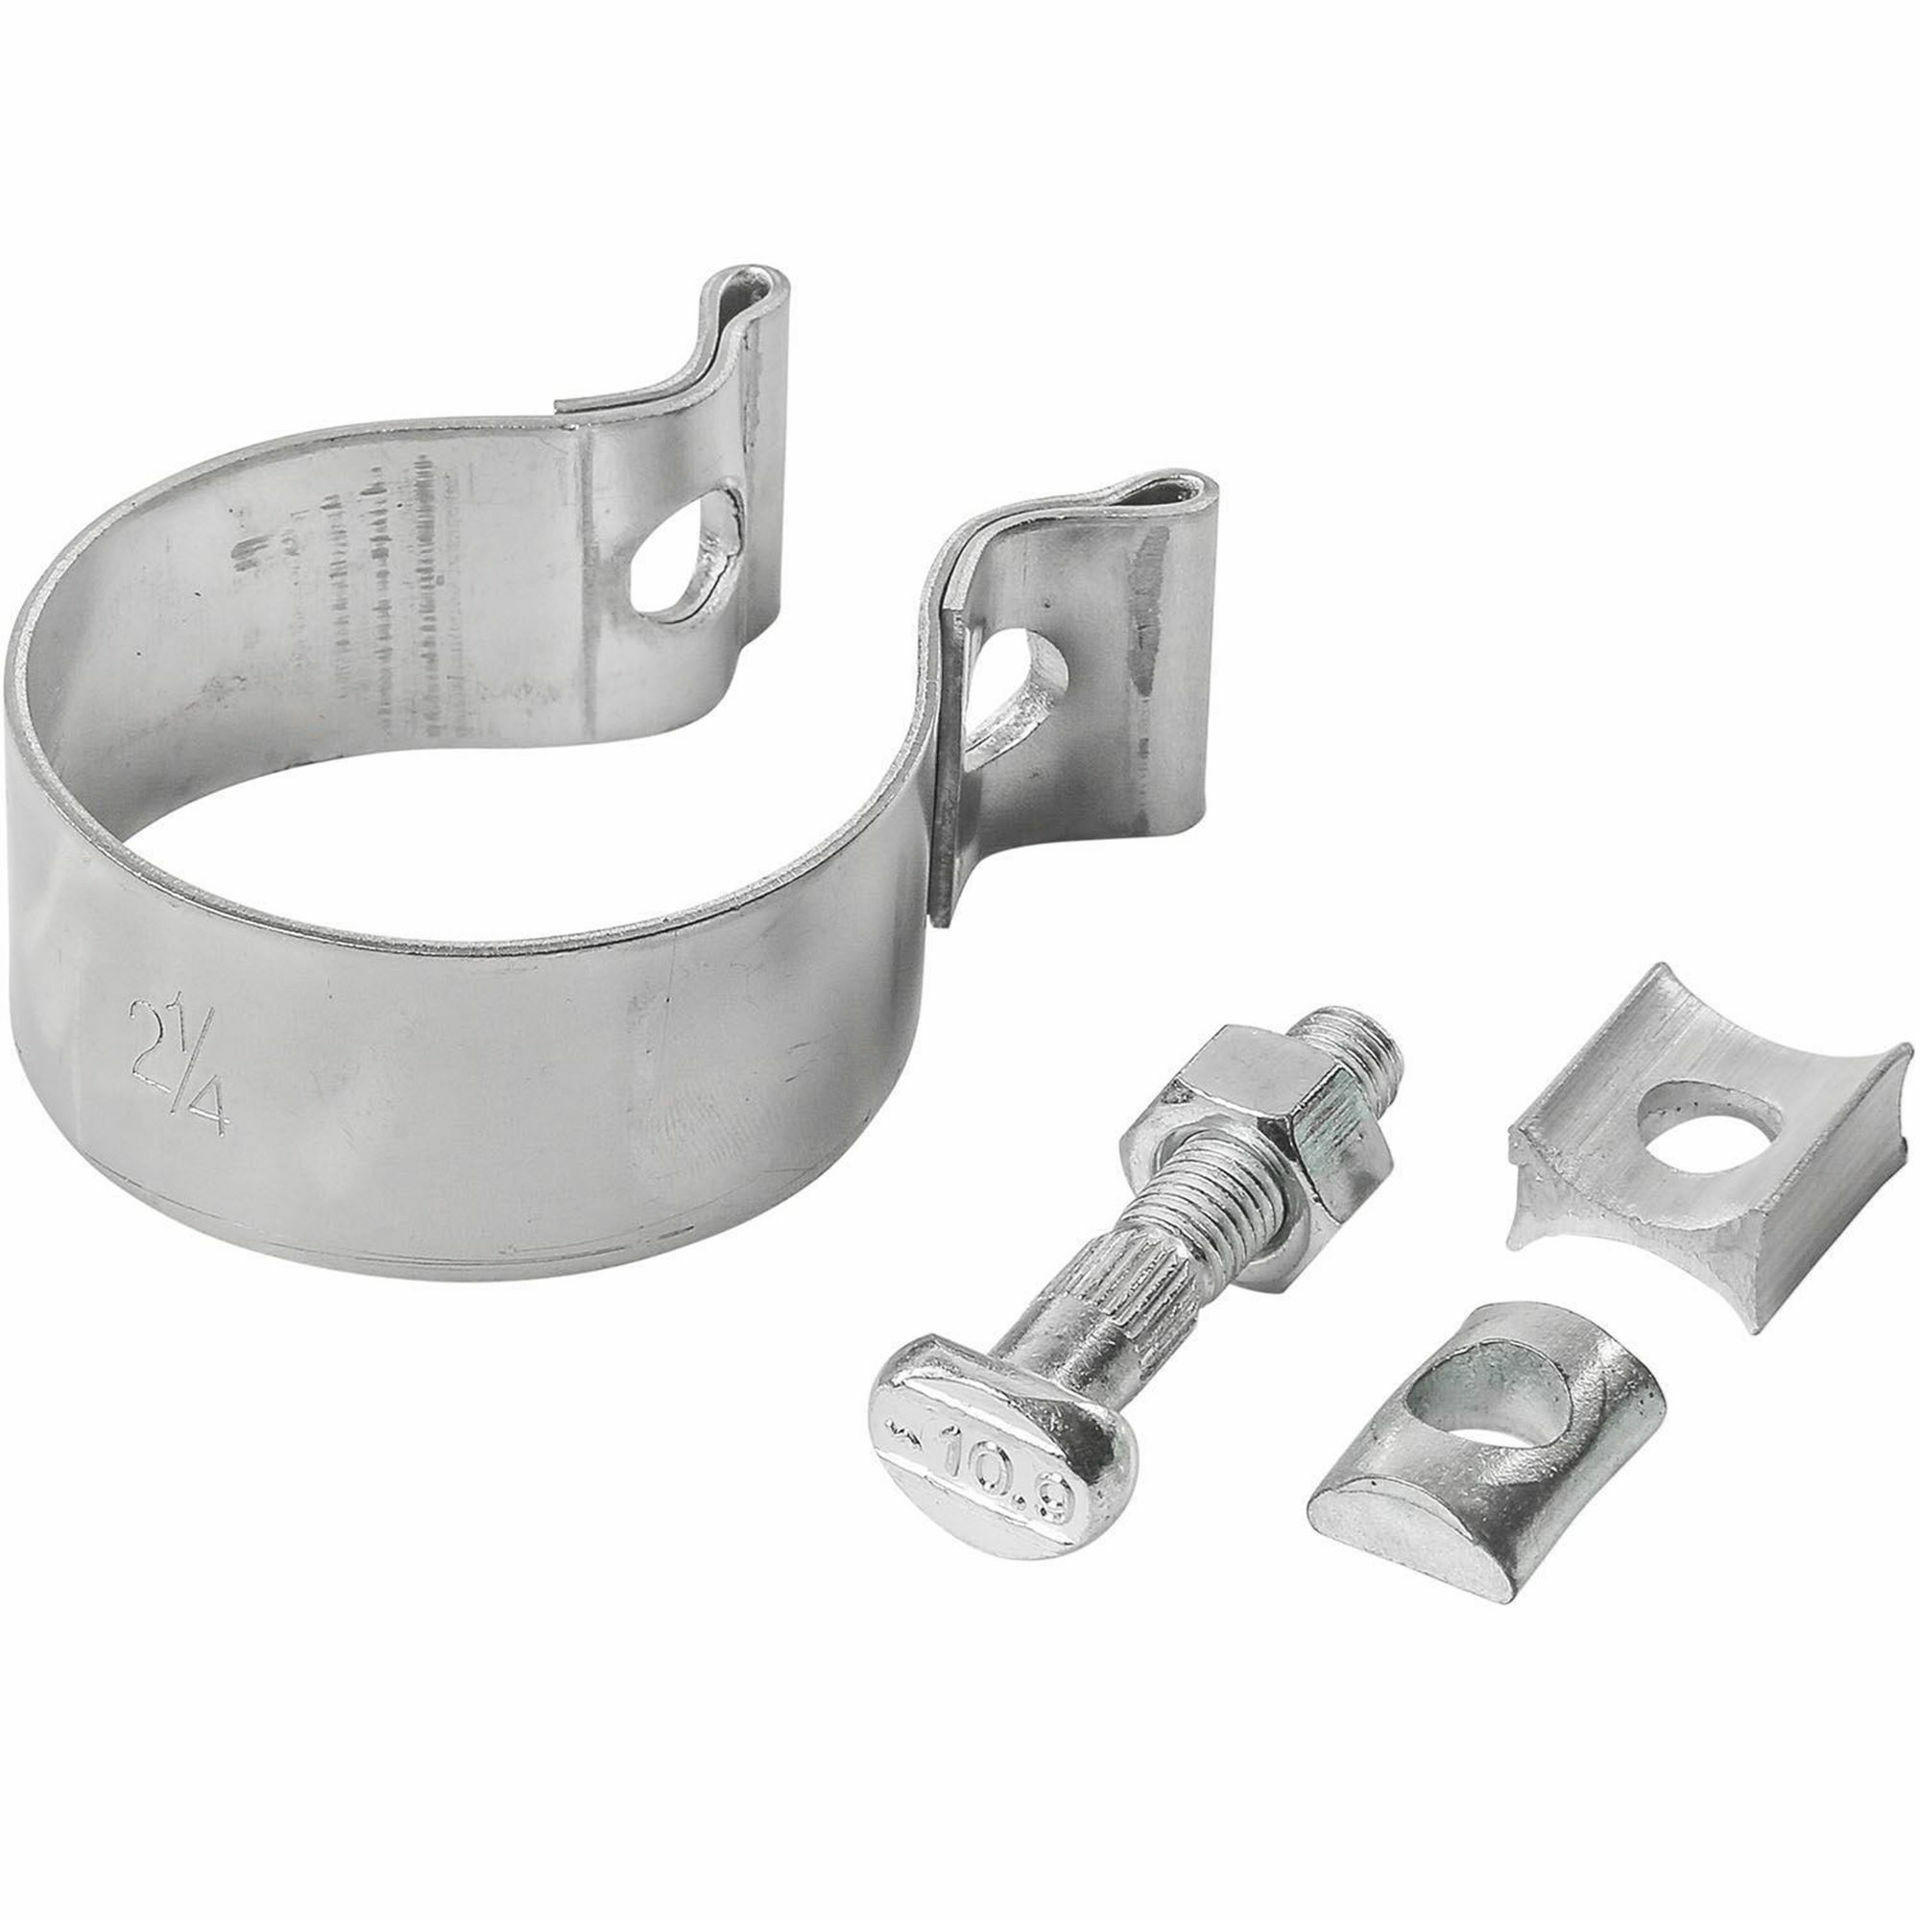 2" inch exhaust clamp, muffler clamp, exhaust band clamp, exhaust pipe